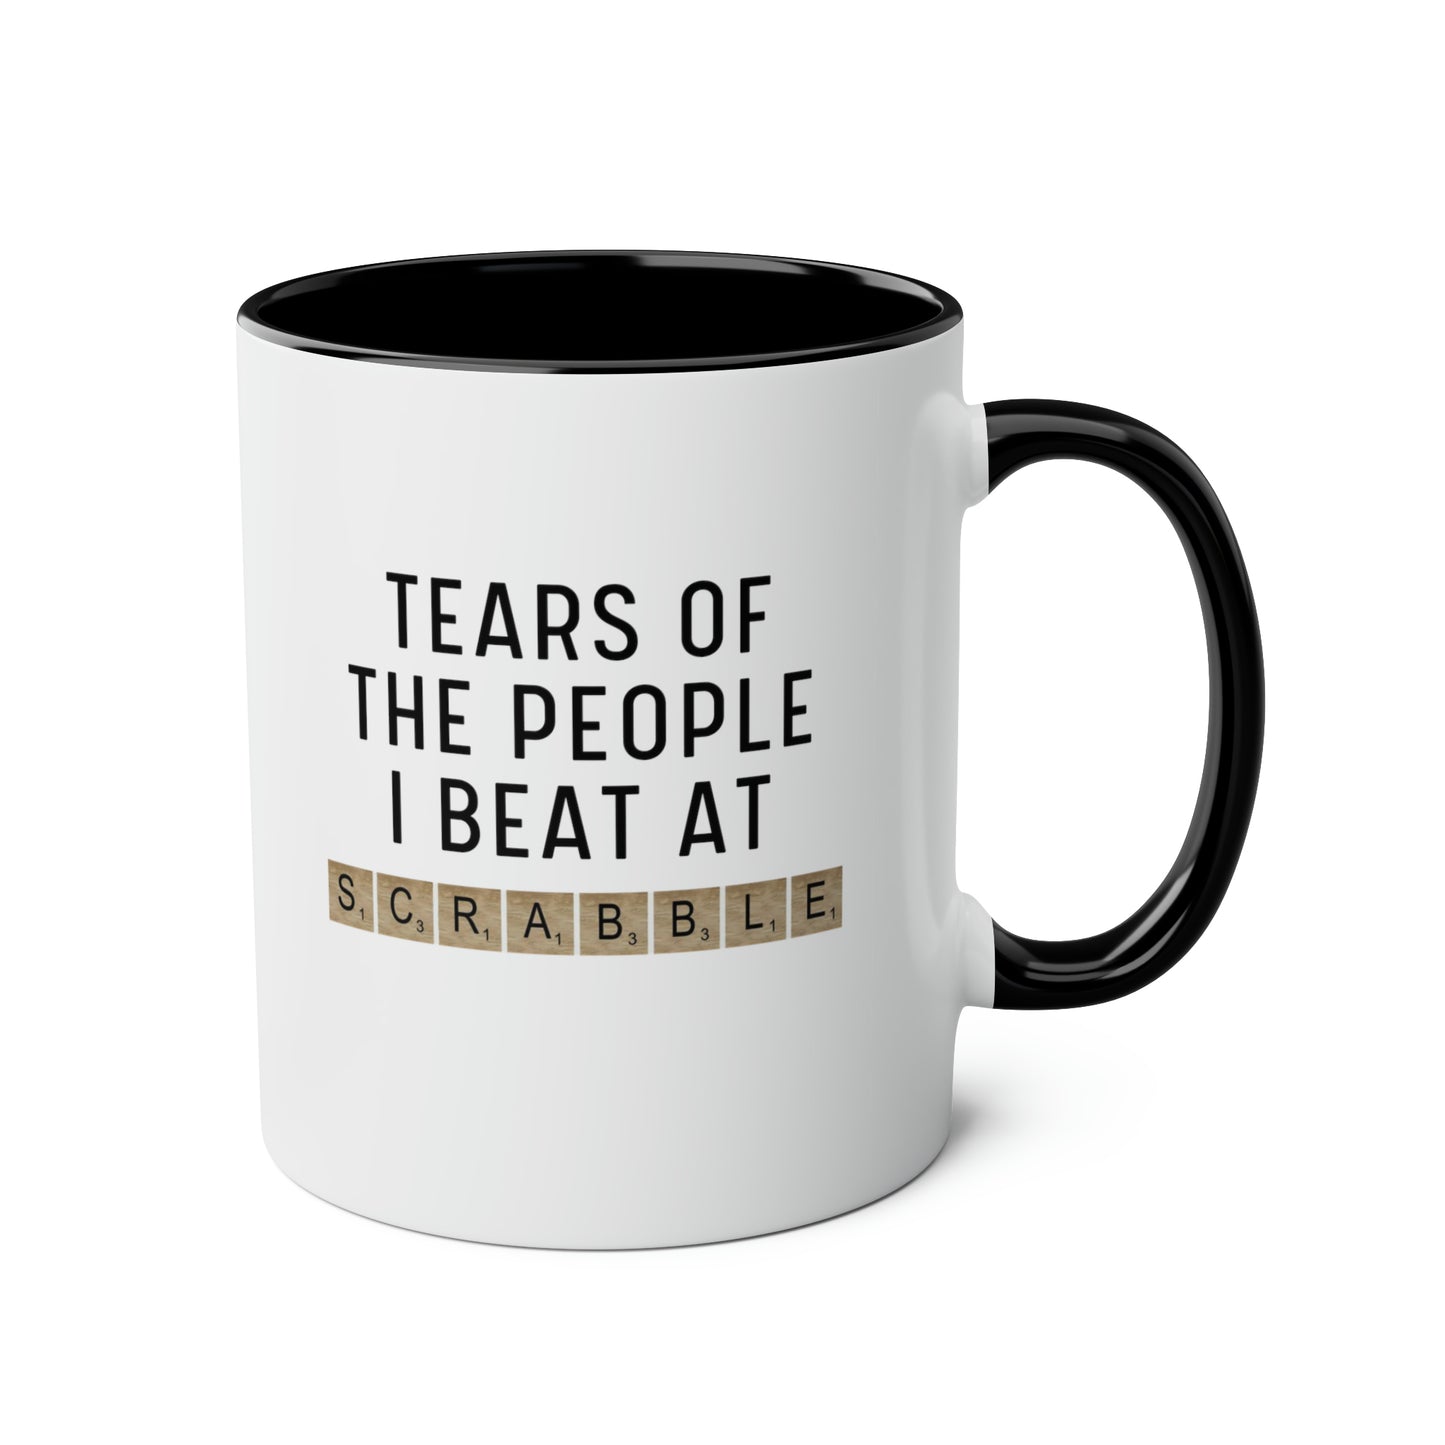 Tears of the People I Beat at Scrabble 11oz white with black accent Funny large Coffee Mug Player Gift Board Game Tiles Lover Gift waveywares wavey wares wavywares wavy wares